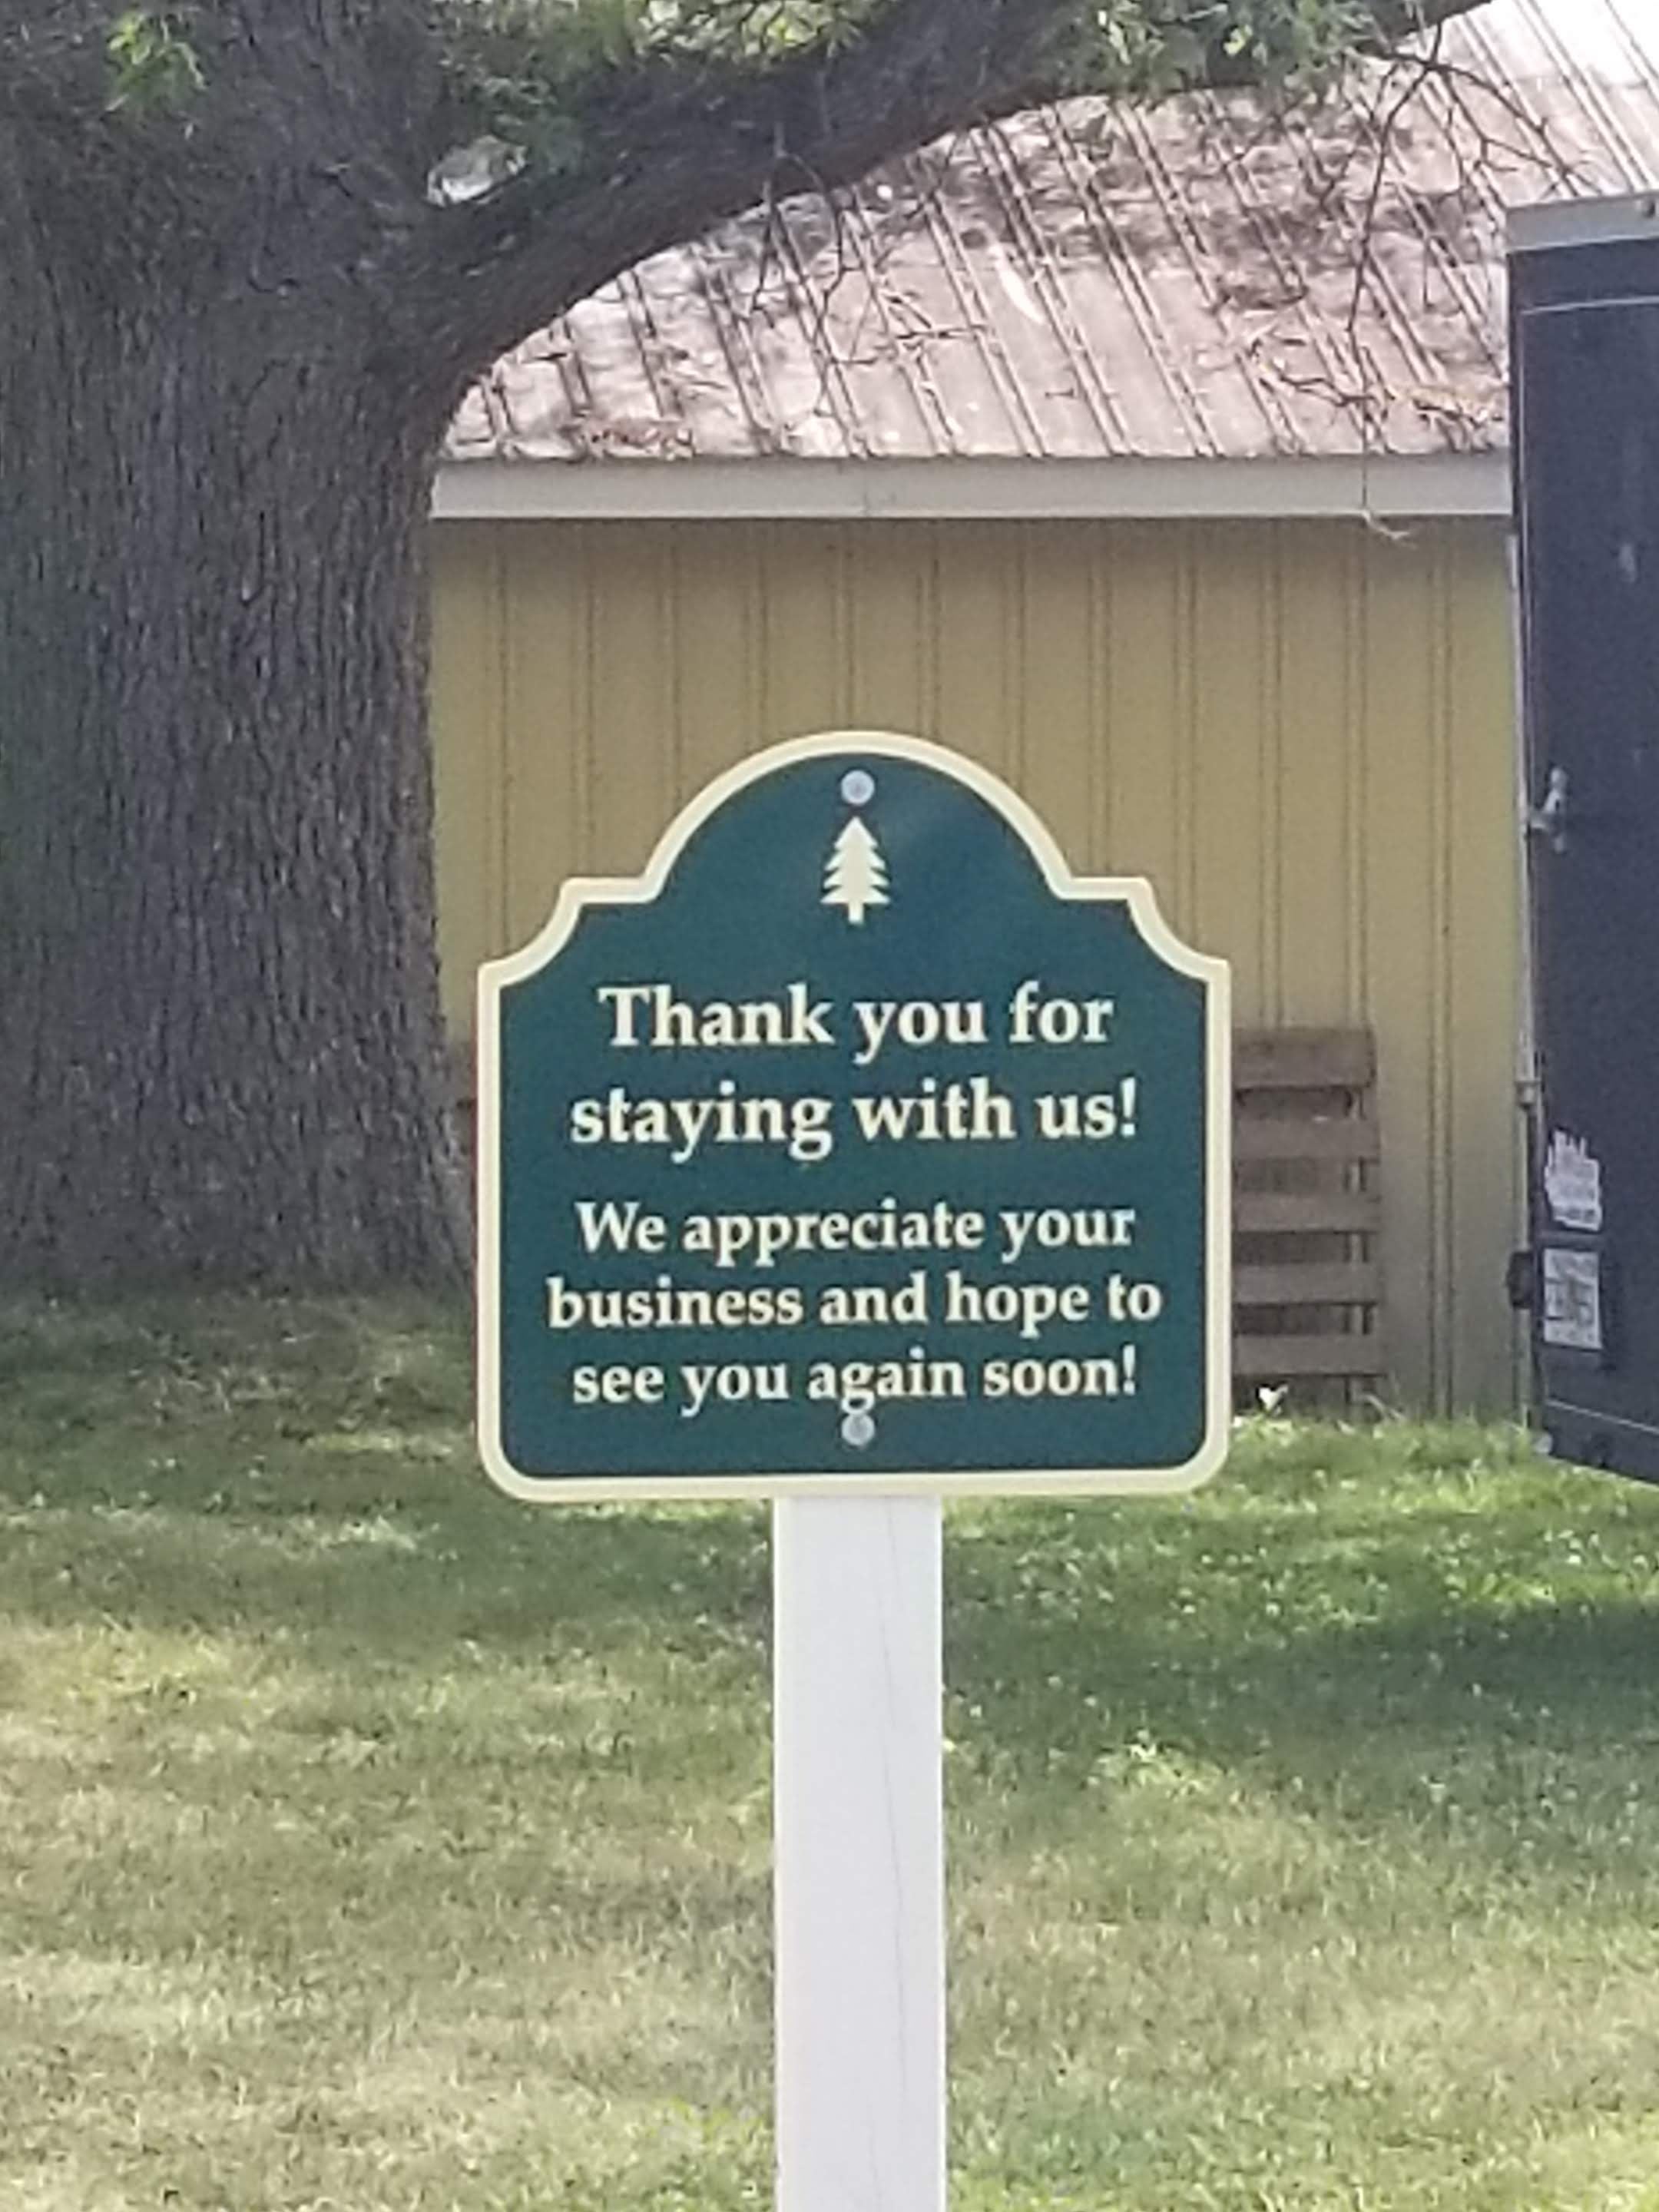 Cute signs throughout the park that make you feel welcome.